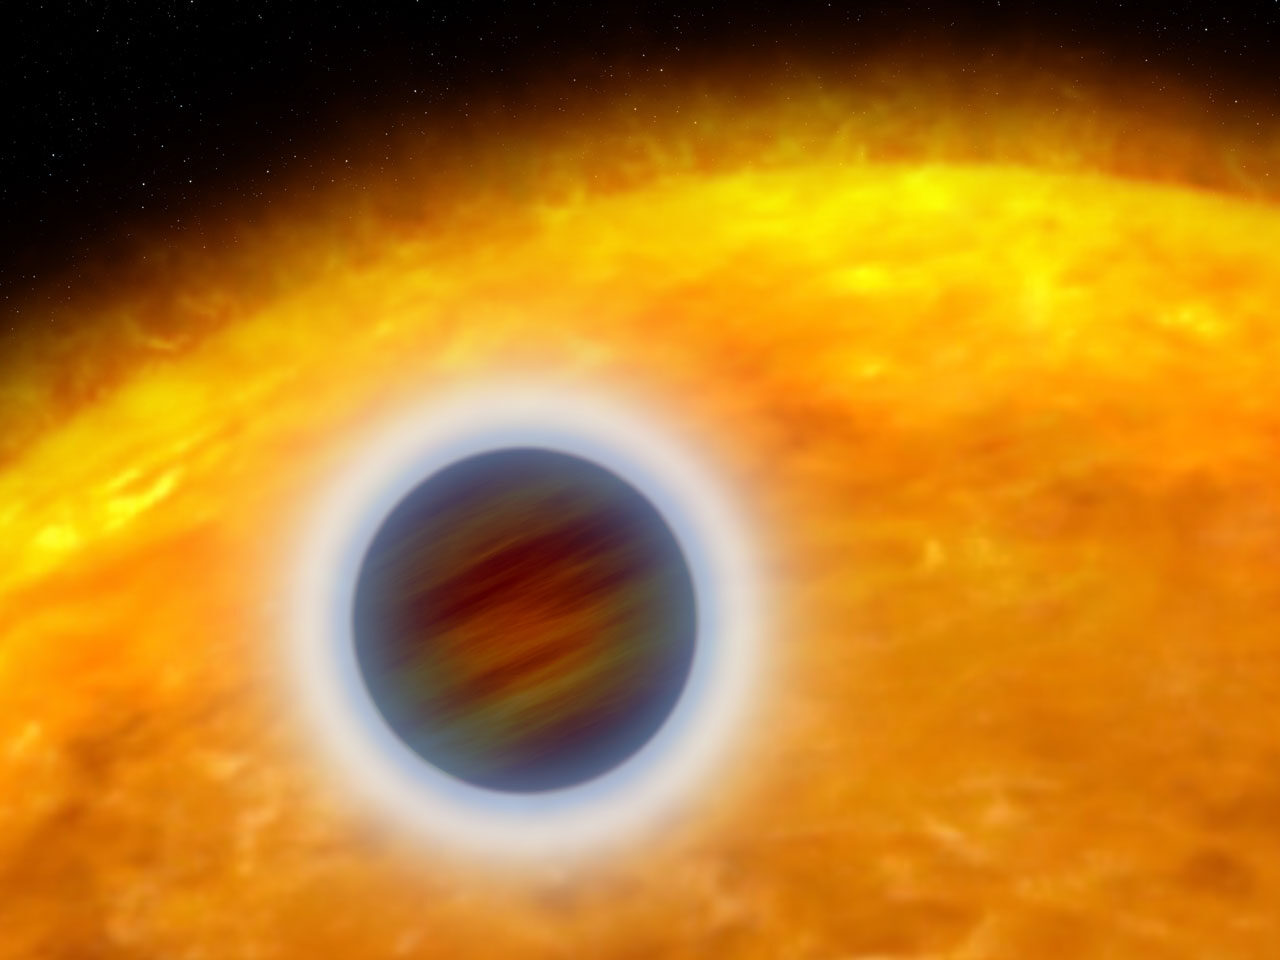 puffed-up-atmosphere-of-a-star-hugging-gas-giant-planet-artist